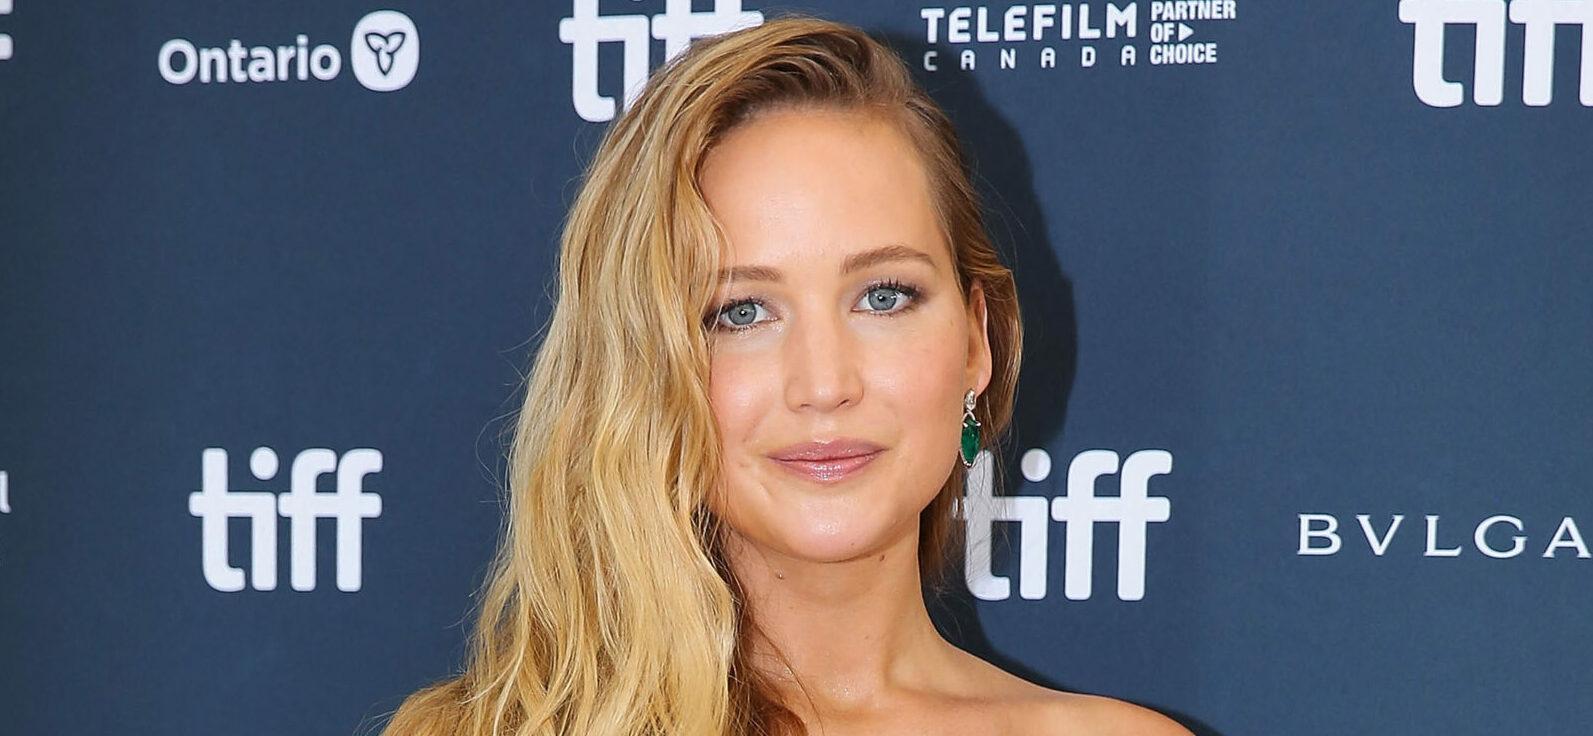 Jennifer Lawrence Hints At Plans To Do More R-rated Films After Starring In ‘No Hard Feelings’